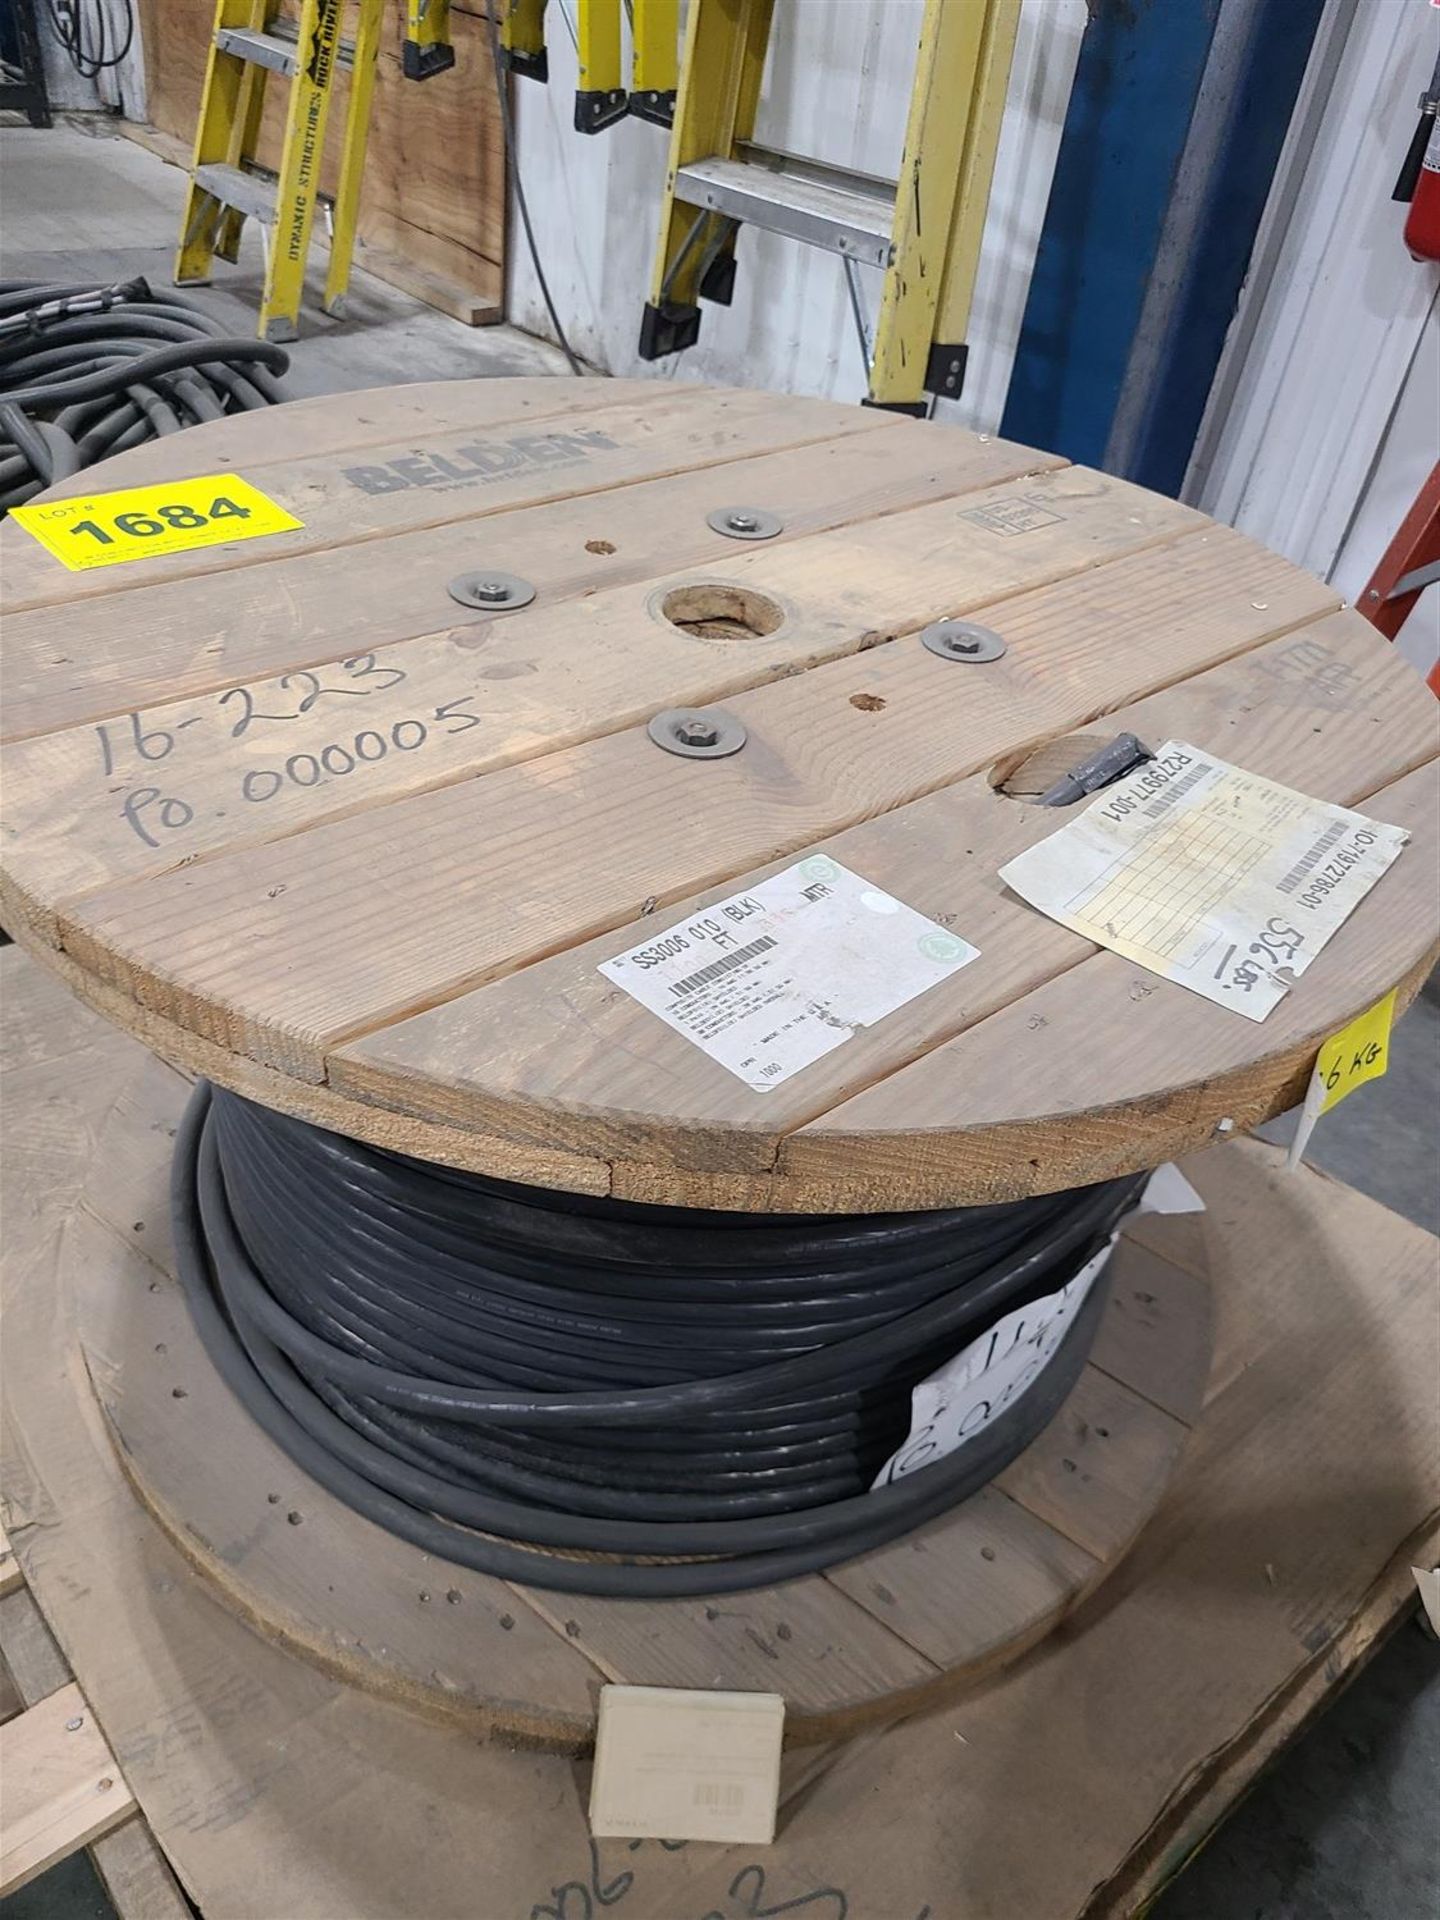 REEL OF ELEC. CABLE